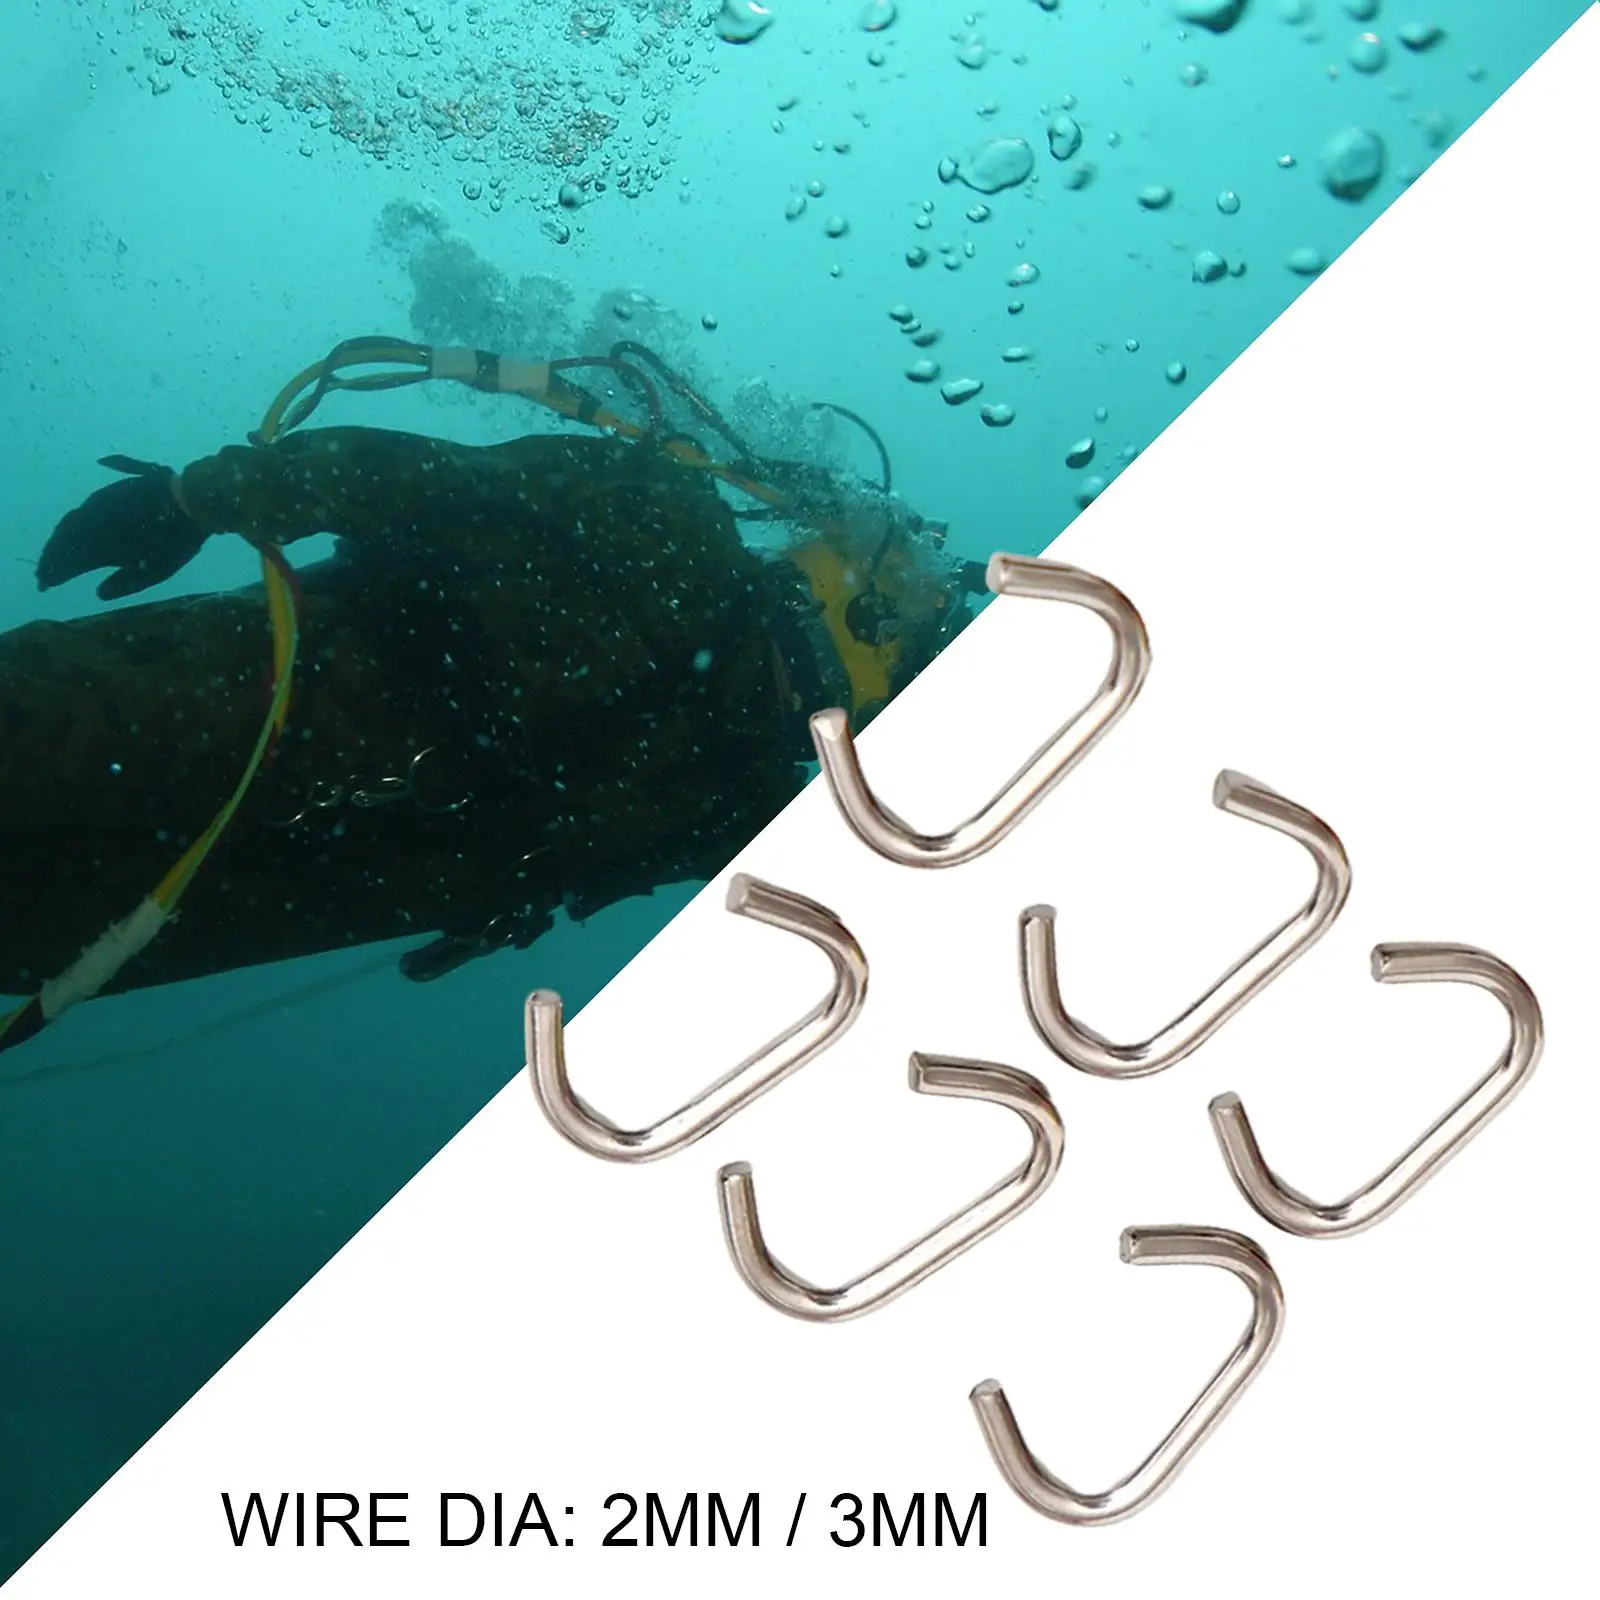 6 Pieces Scuba Diving Bungee Clips Stainless Steel Sidemount Rope Holder